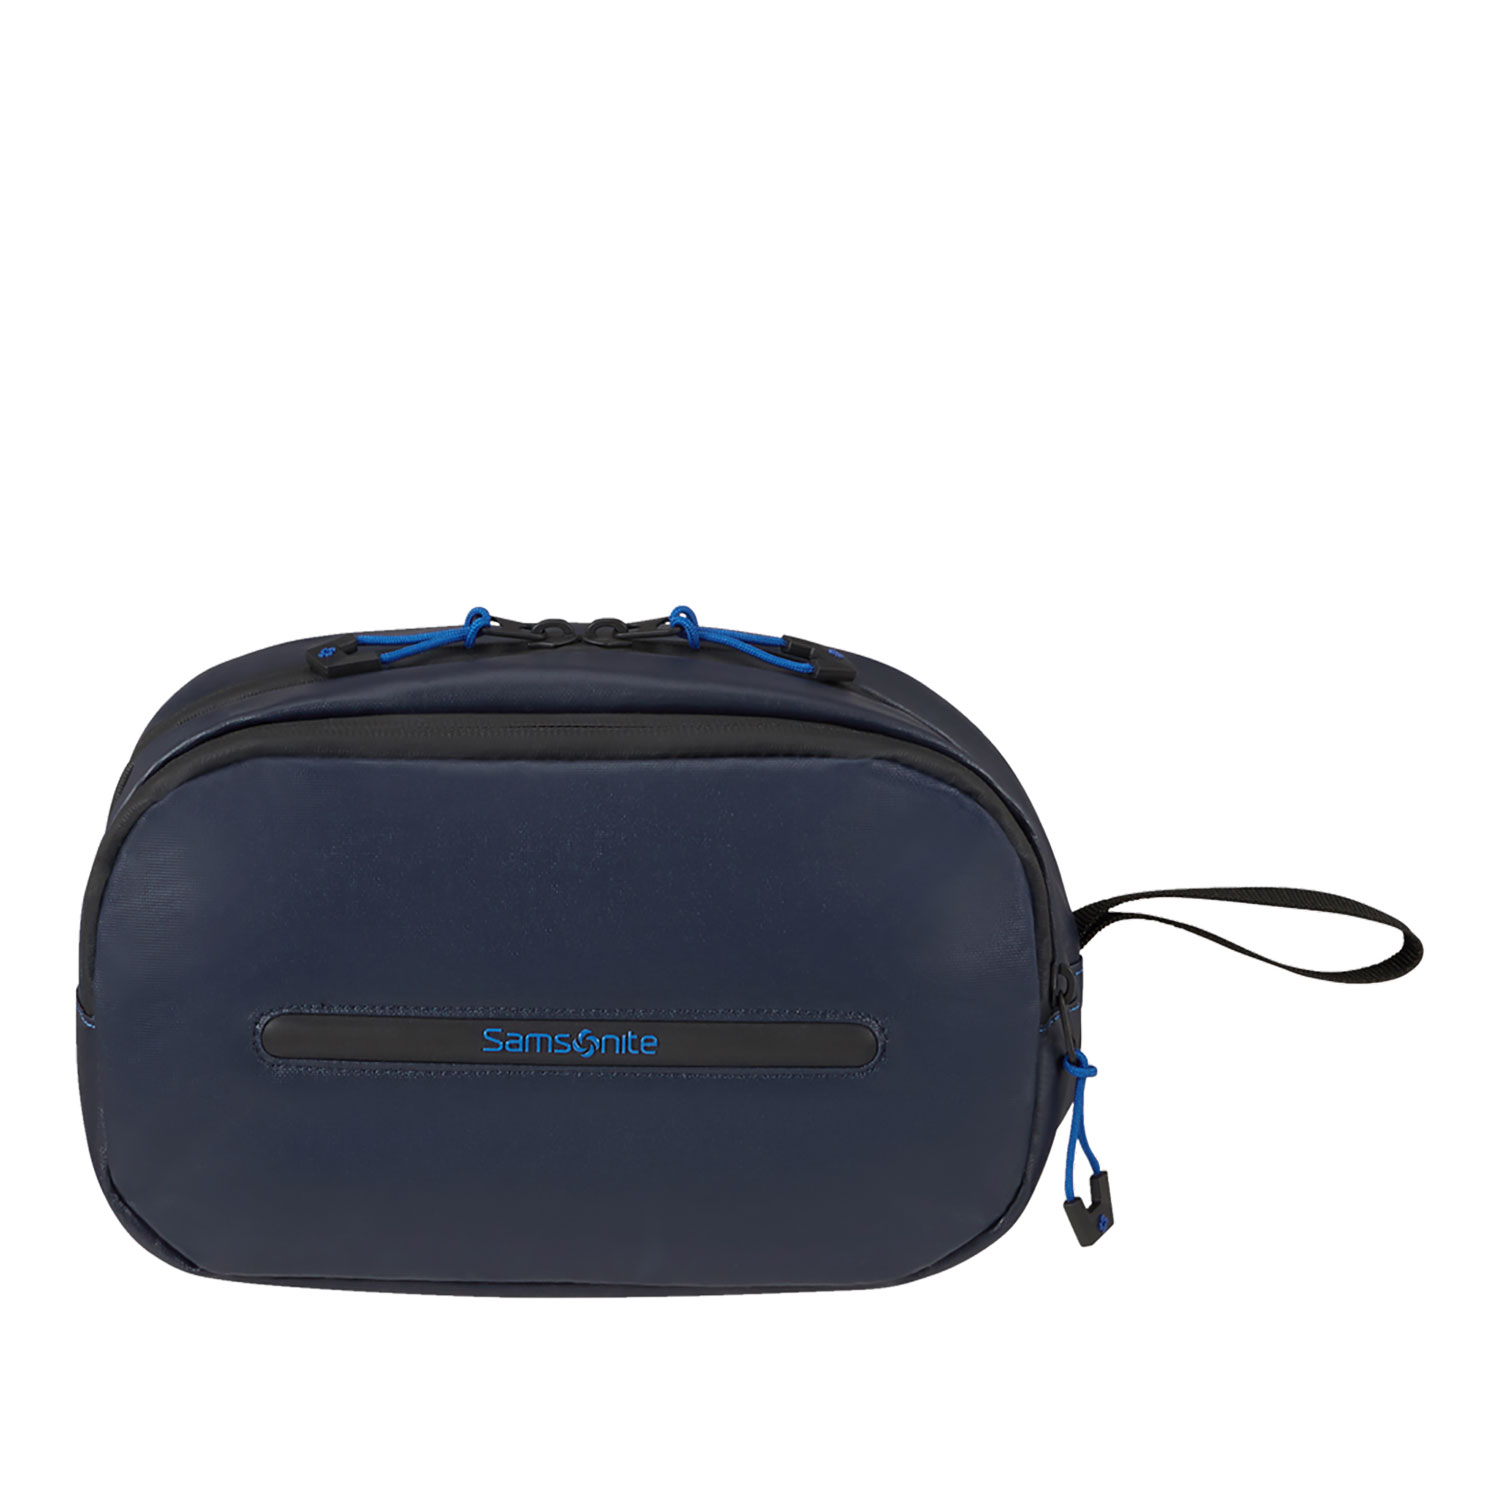 Samsonite Sling Belt Bag Convertible Authentic not back pack FIXED PRICE,  Men's Fashion, Bags, Sling Bags on Carousell